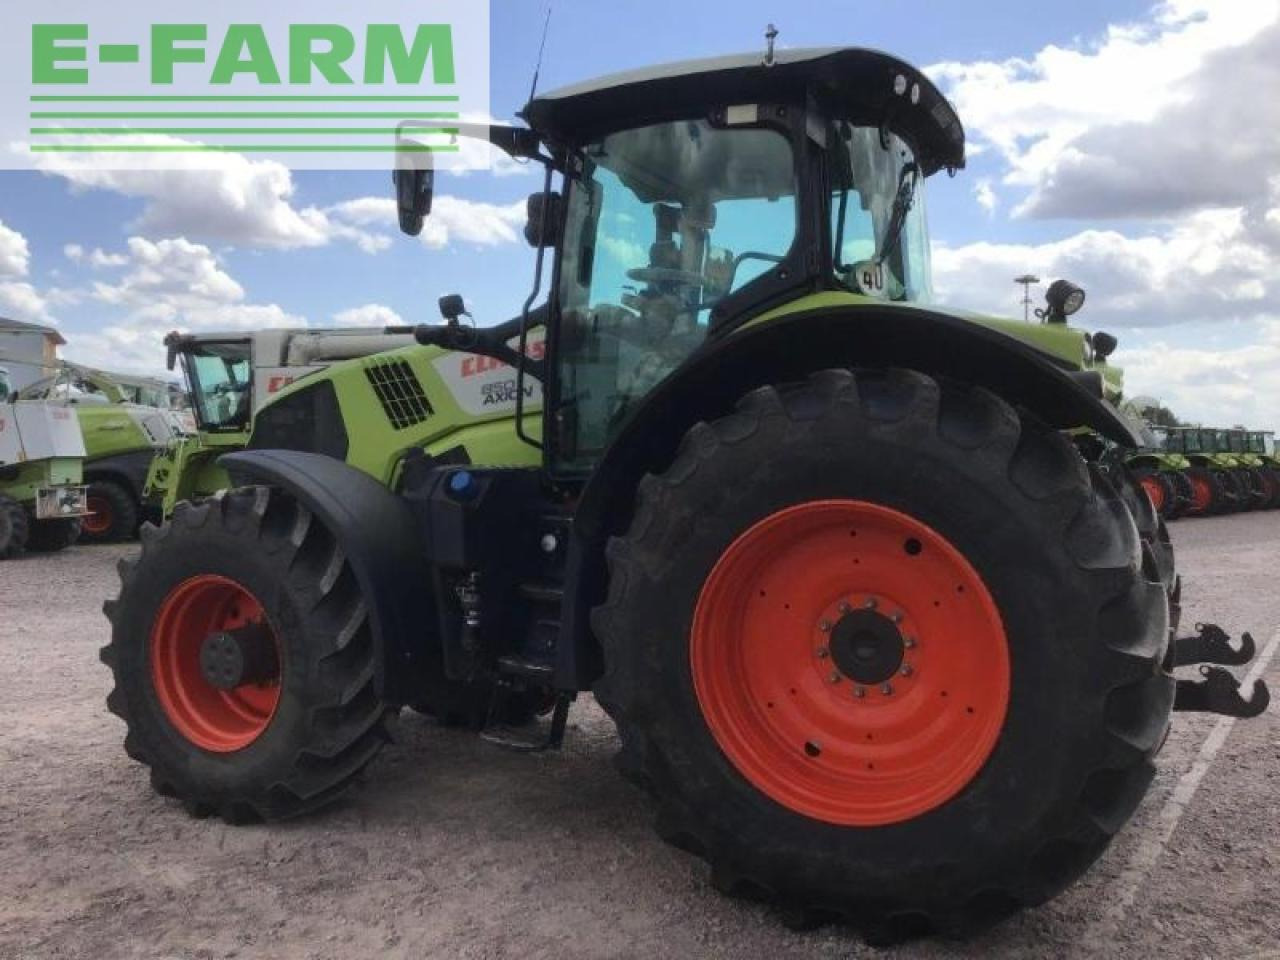 Tracteur agricole CLAAS axion 850 c-matic